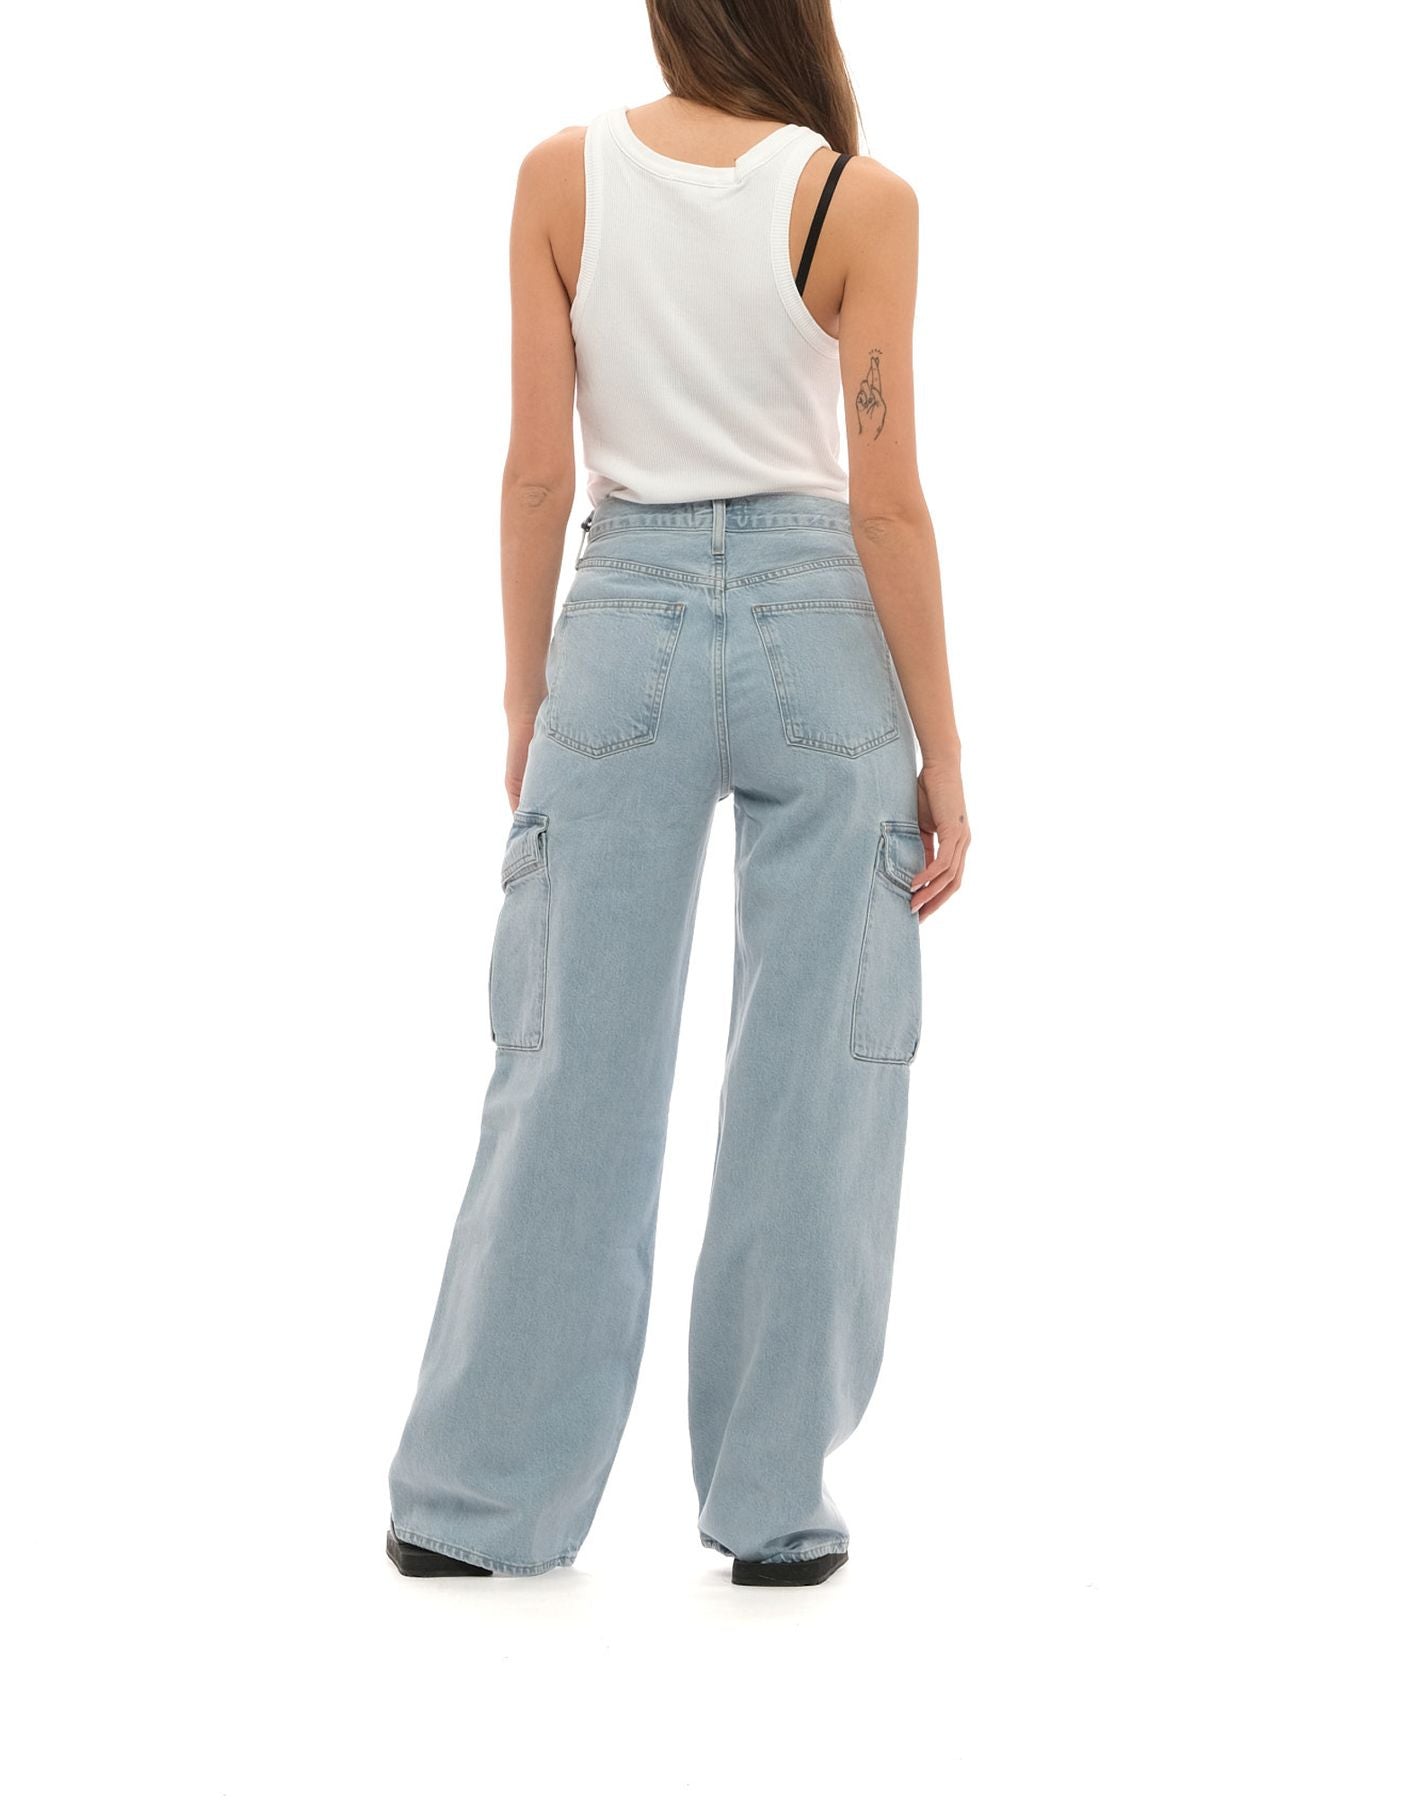 Jeans for woman A9117-1463 REALM Agolde